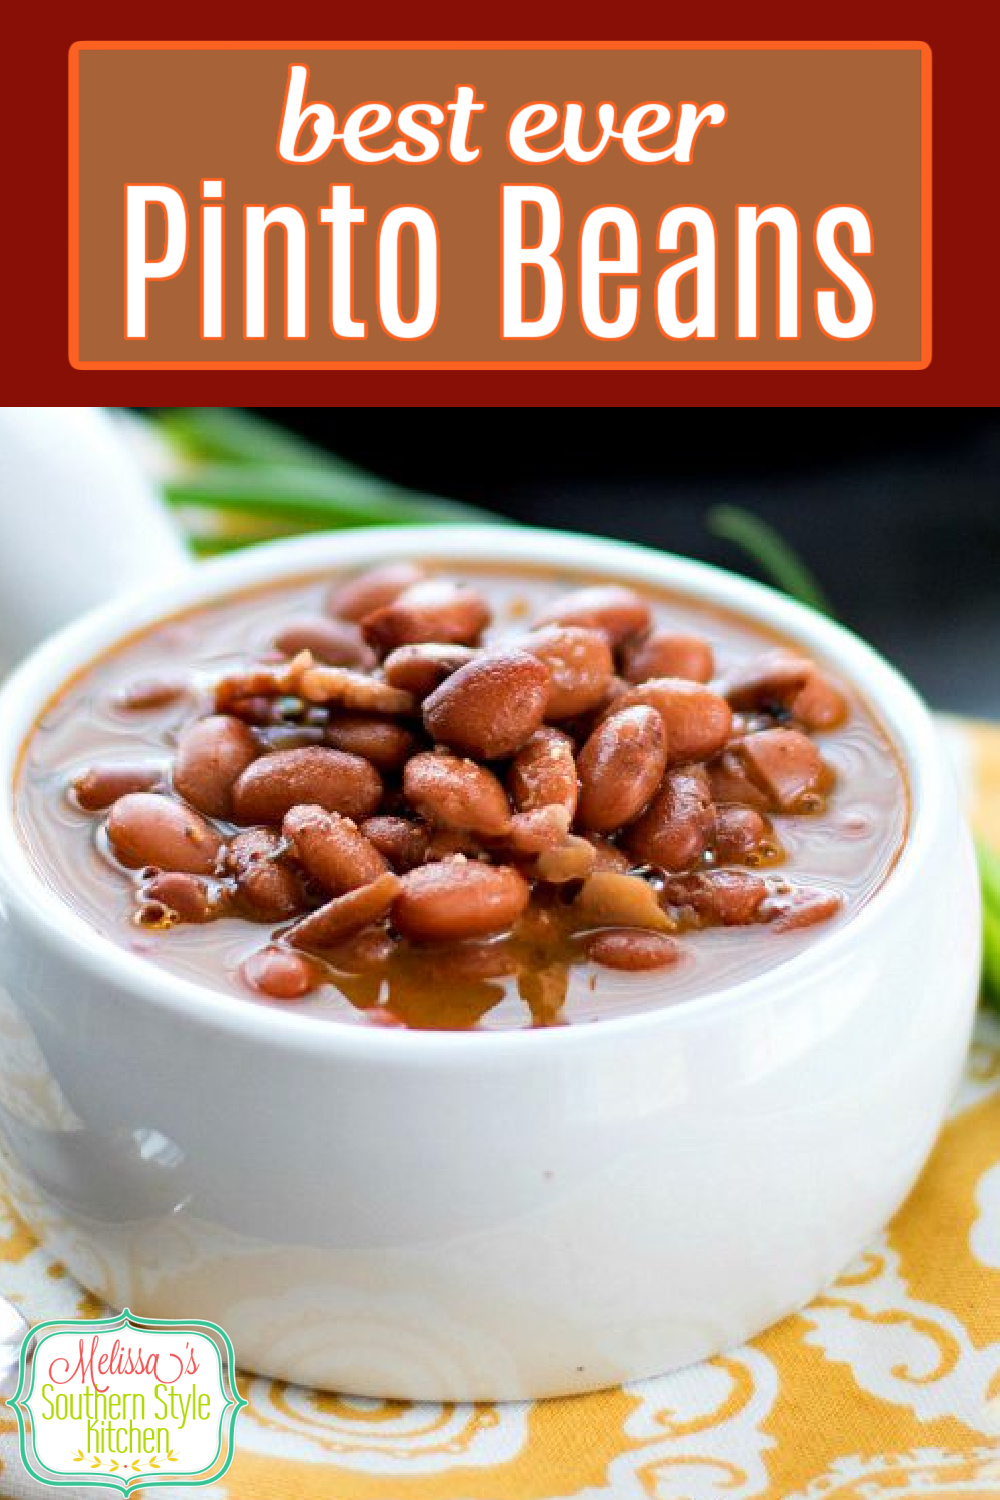 The addition of bacon and a fresh blend of seasonings elevates this budget friendly Southern classic #pintobeans #perfectpintobeans #beansrecipes #southernfood #dinner #dinnerideas #familyfriendly #budgetfriendlyrecipes #beans #brownbeans #maindish #sidedishrecipes #southernrecipes via @melissasssk